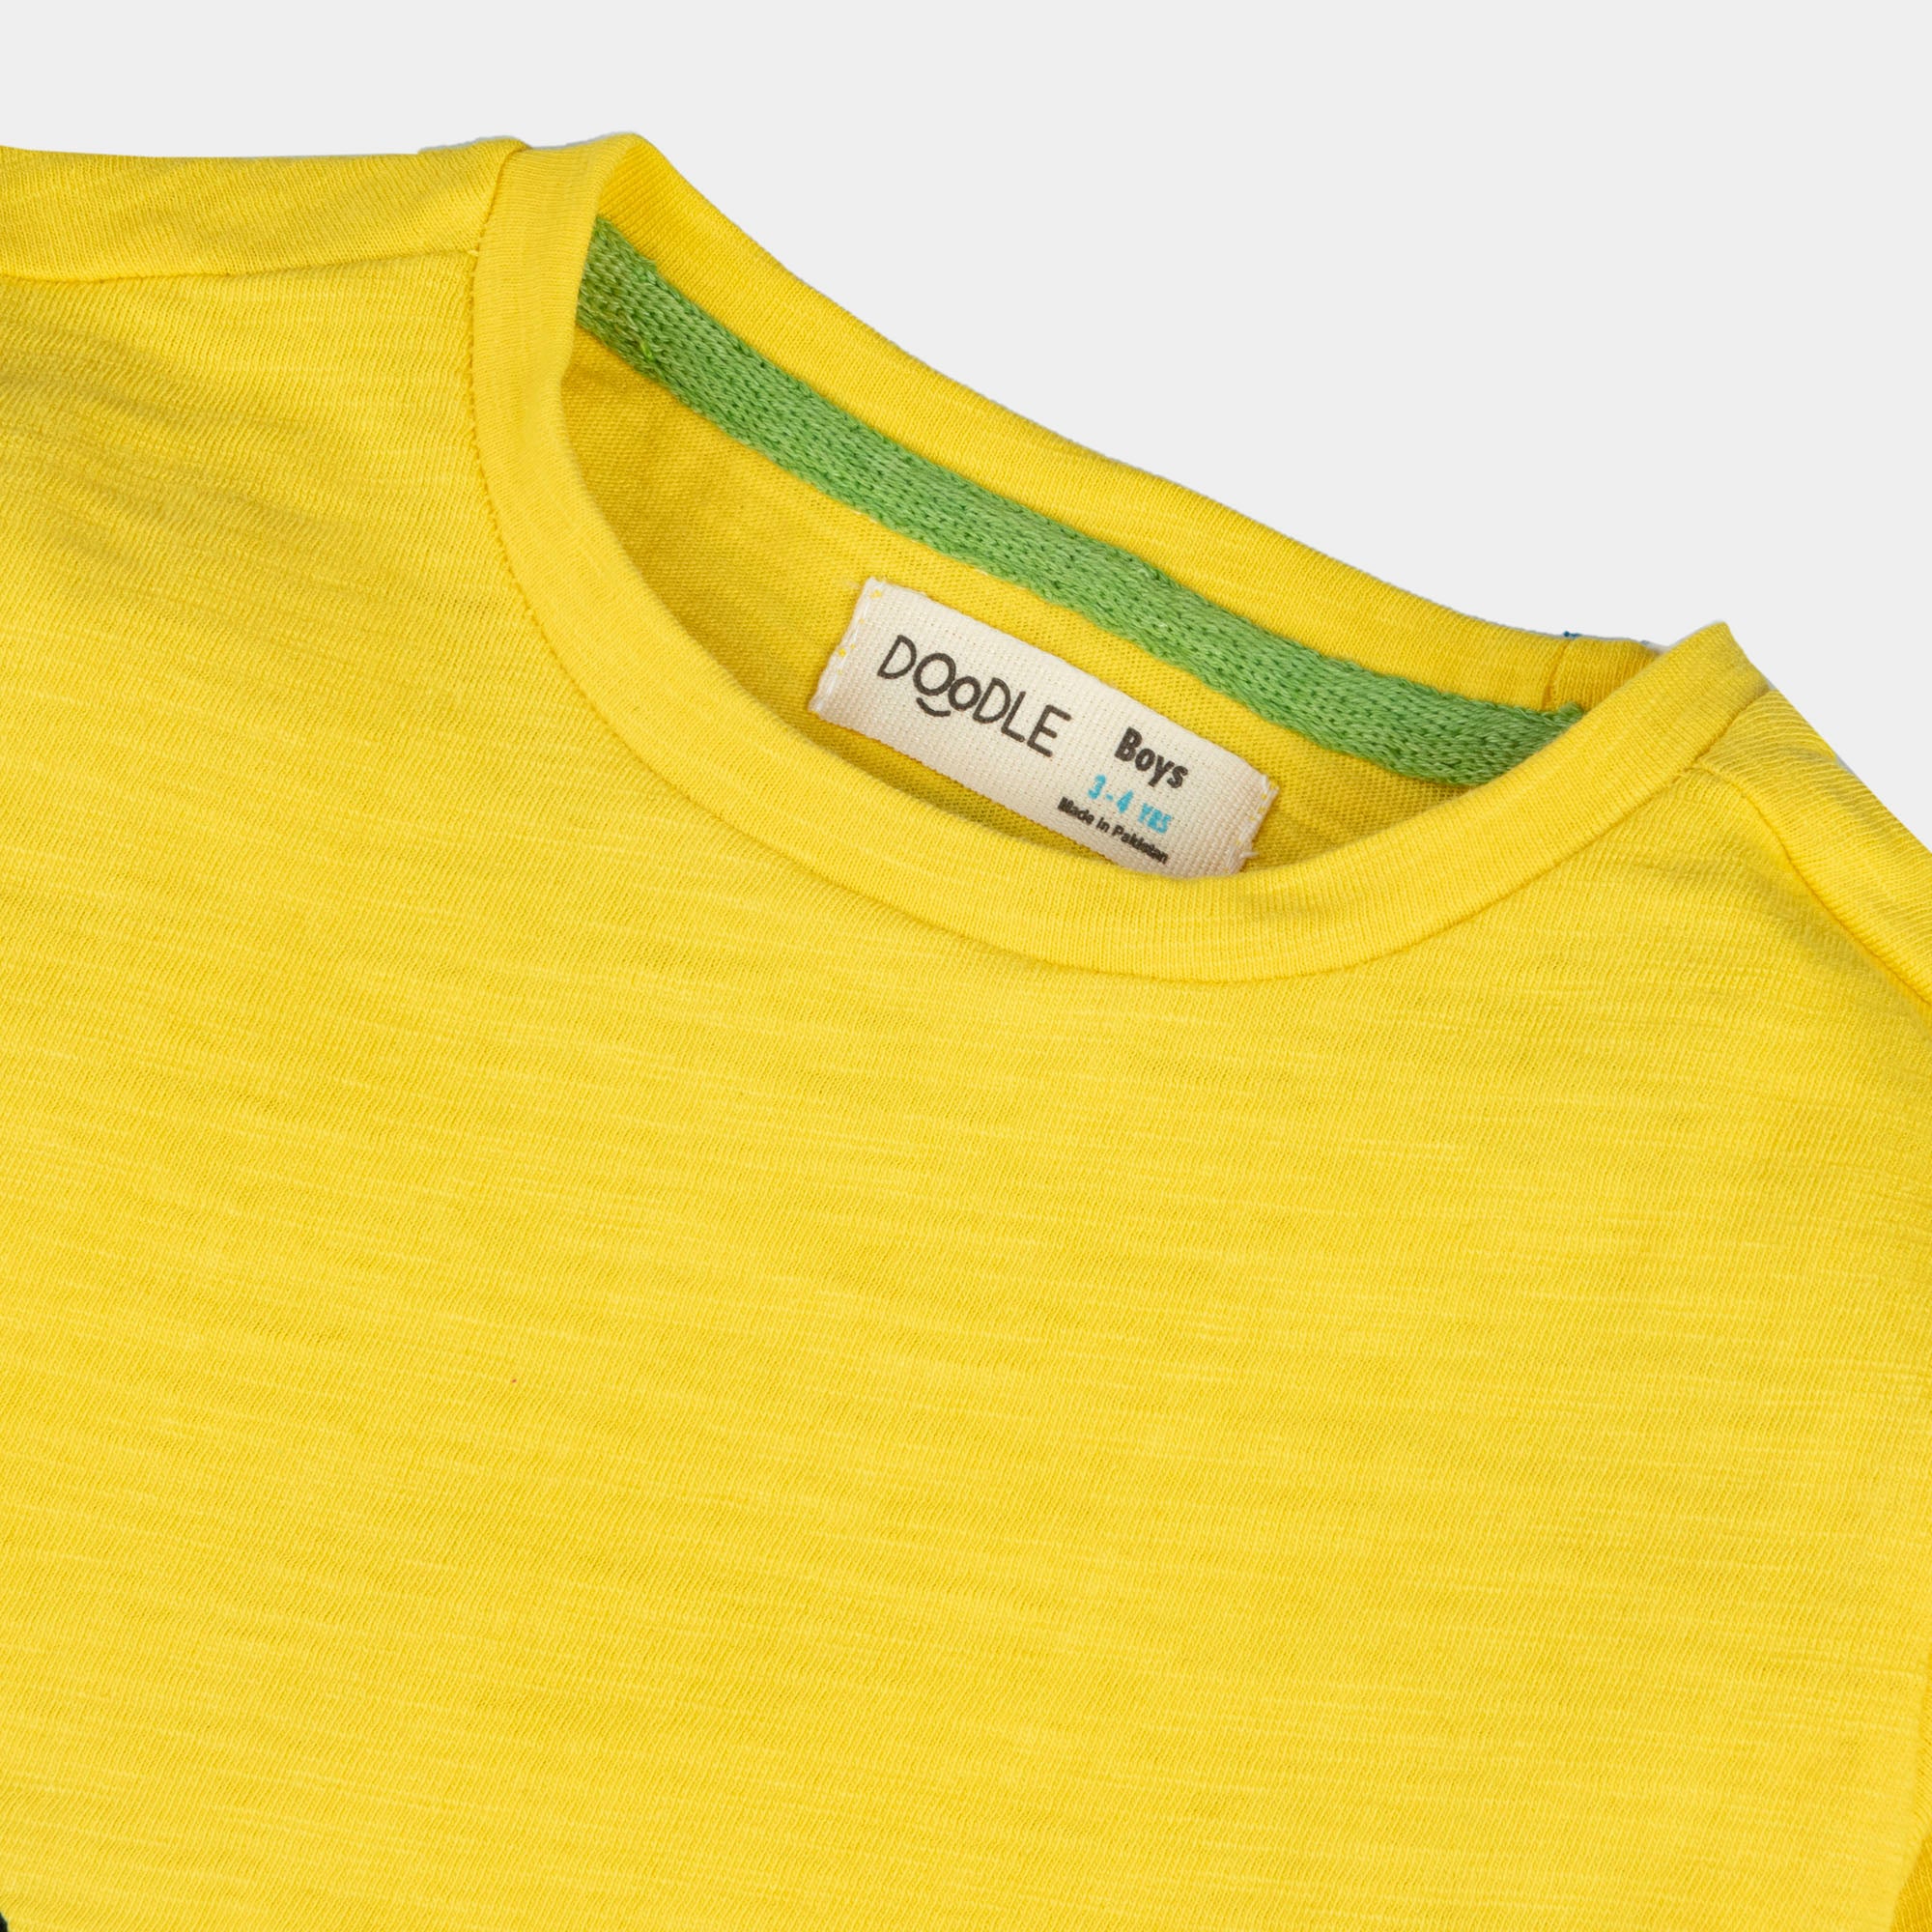 Boys Lime Yelow Parrot Graphic Tee